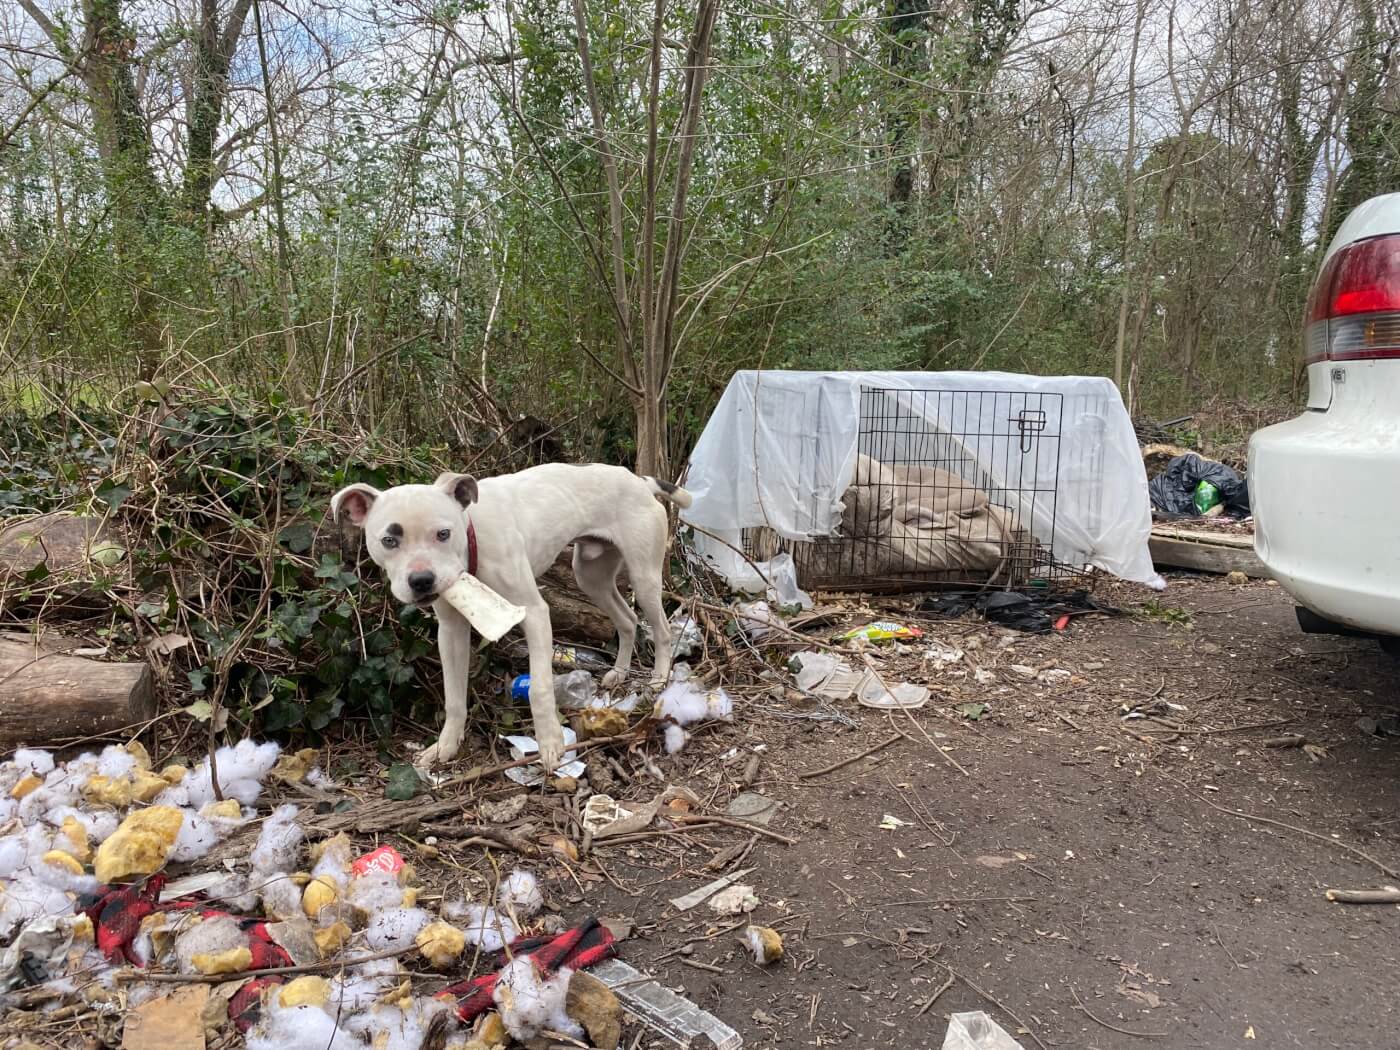 PETAs rescue team visited this "backyard dog" kept in a yard full of trash